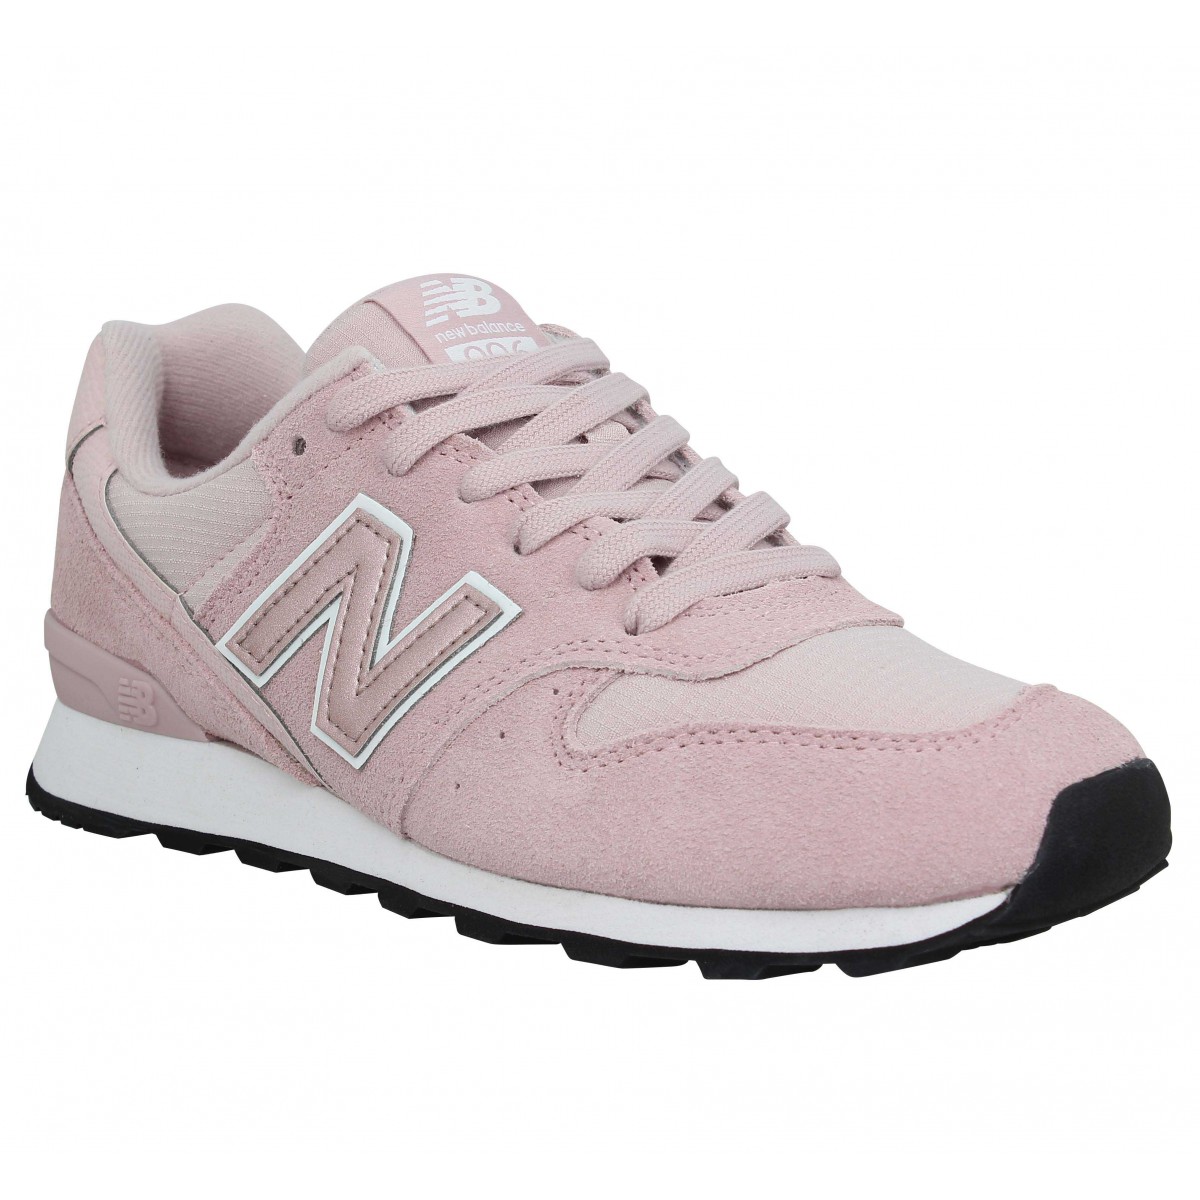 New balance 996 velours toile femme rose femme | Fanny chaussures